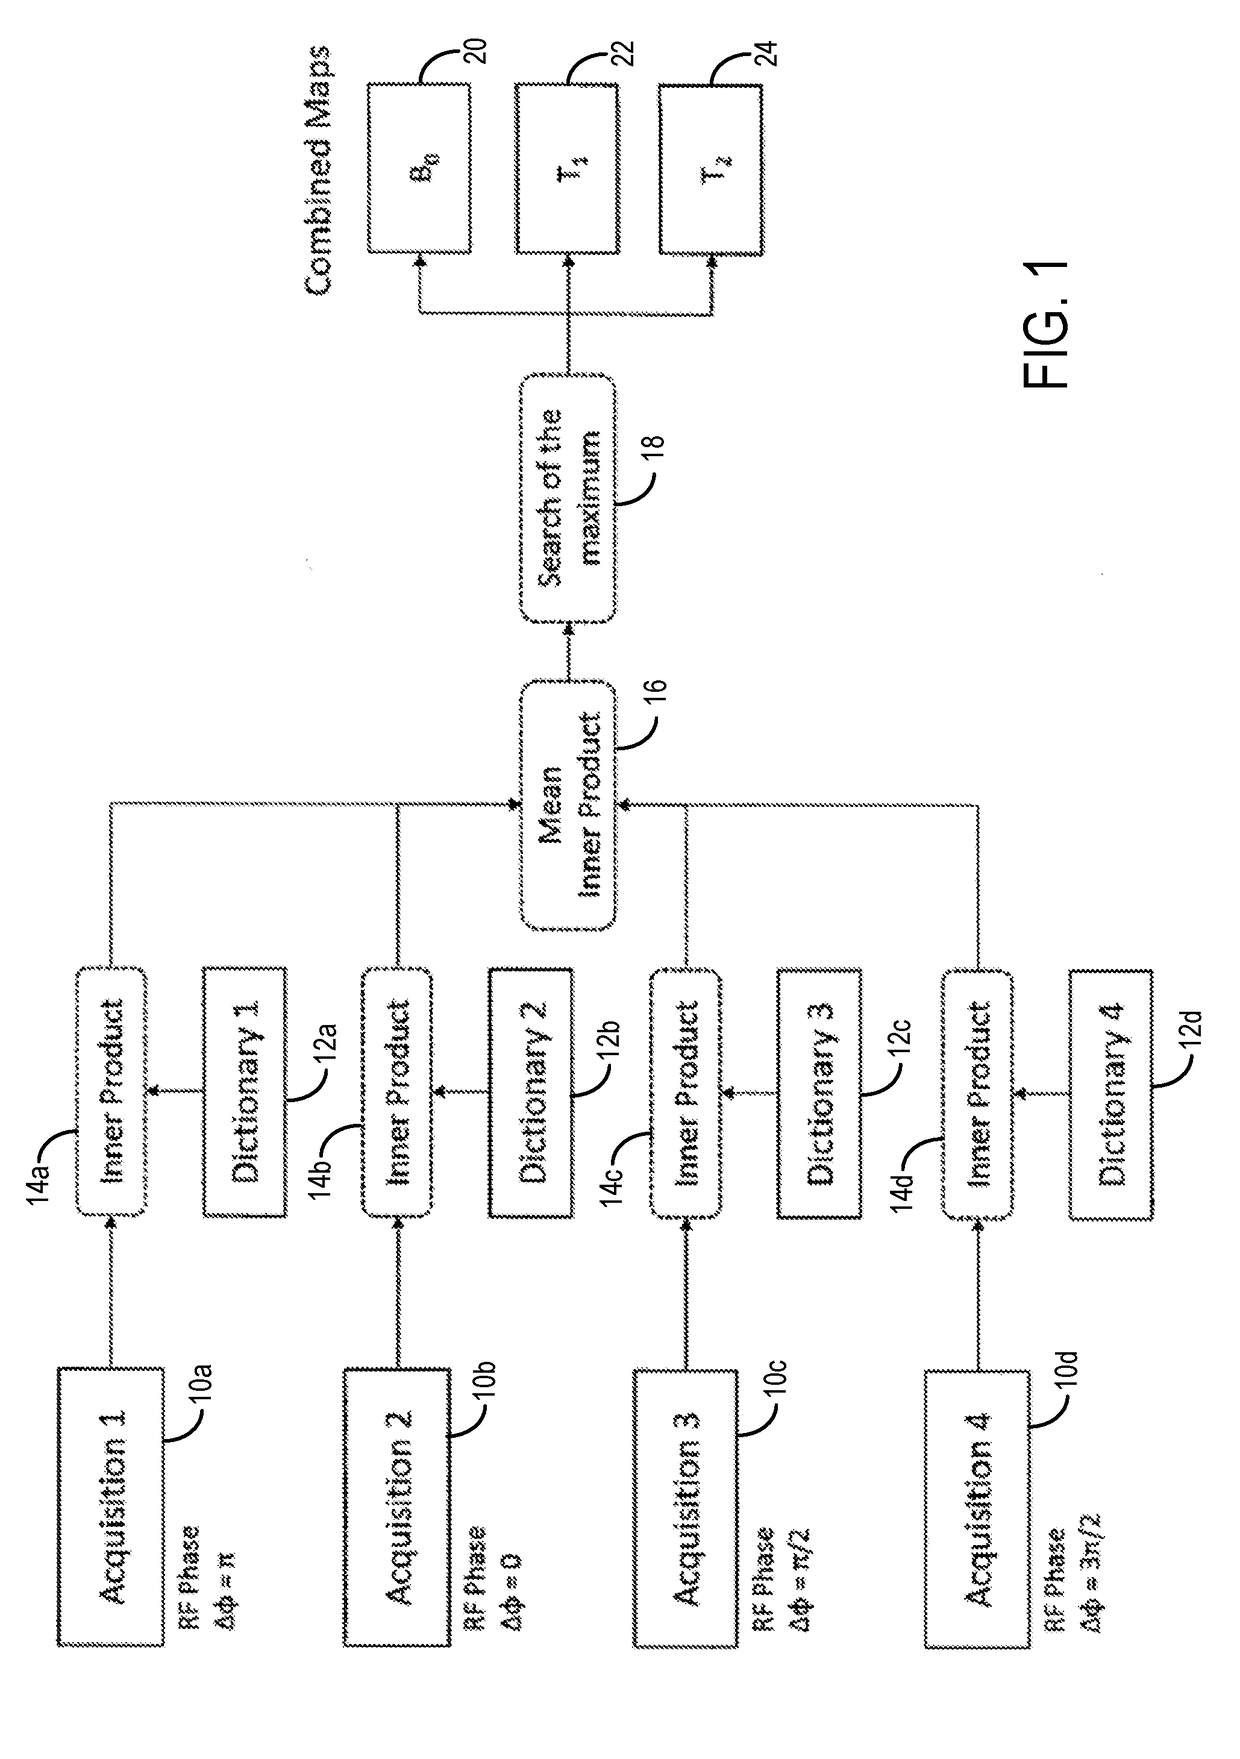 System and Method for Phase Cycling Magnetic Resonance Fingerprinting (PHC-MRF)